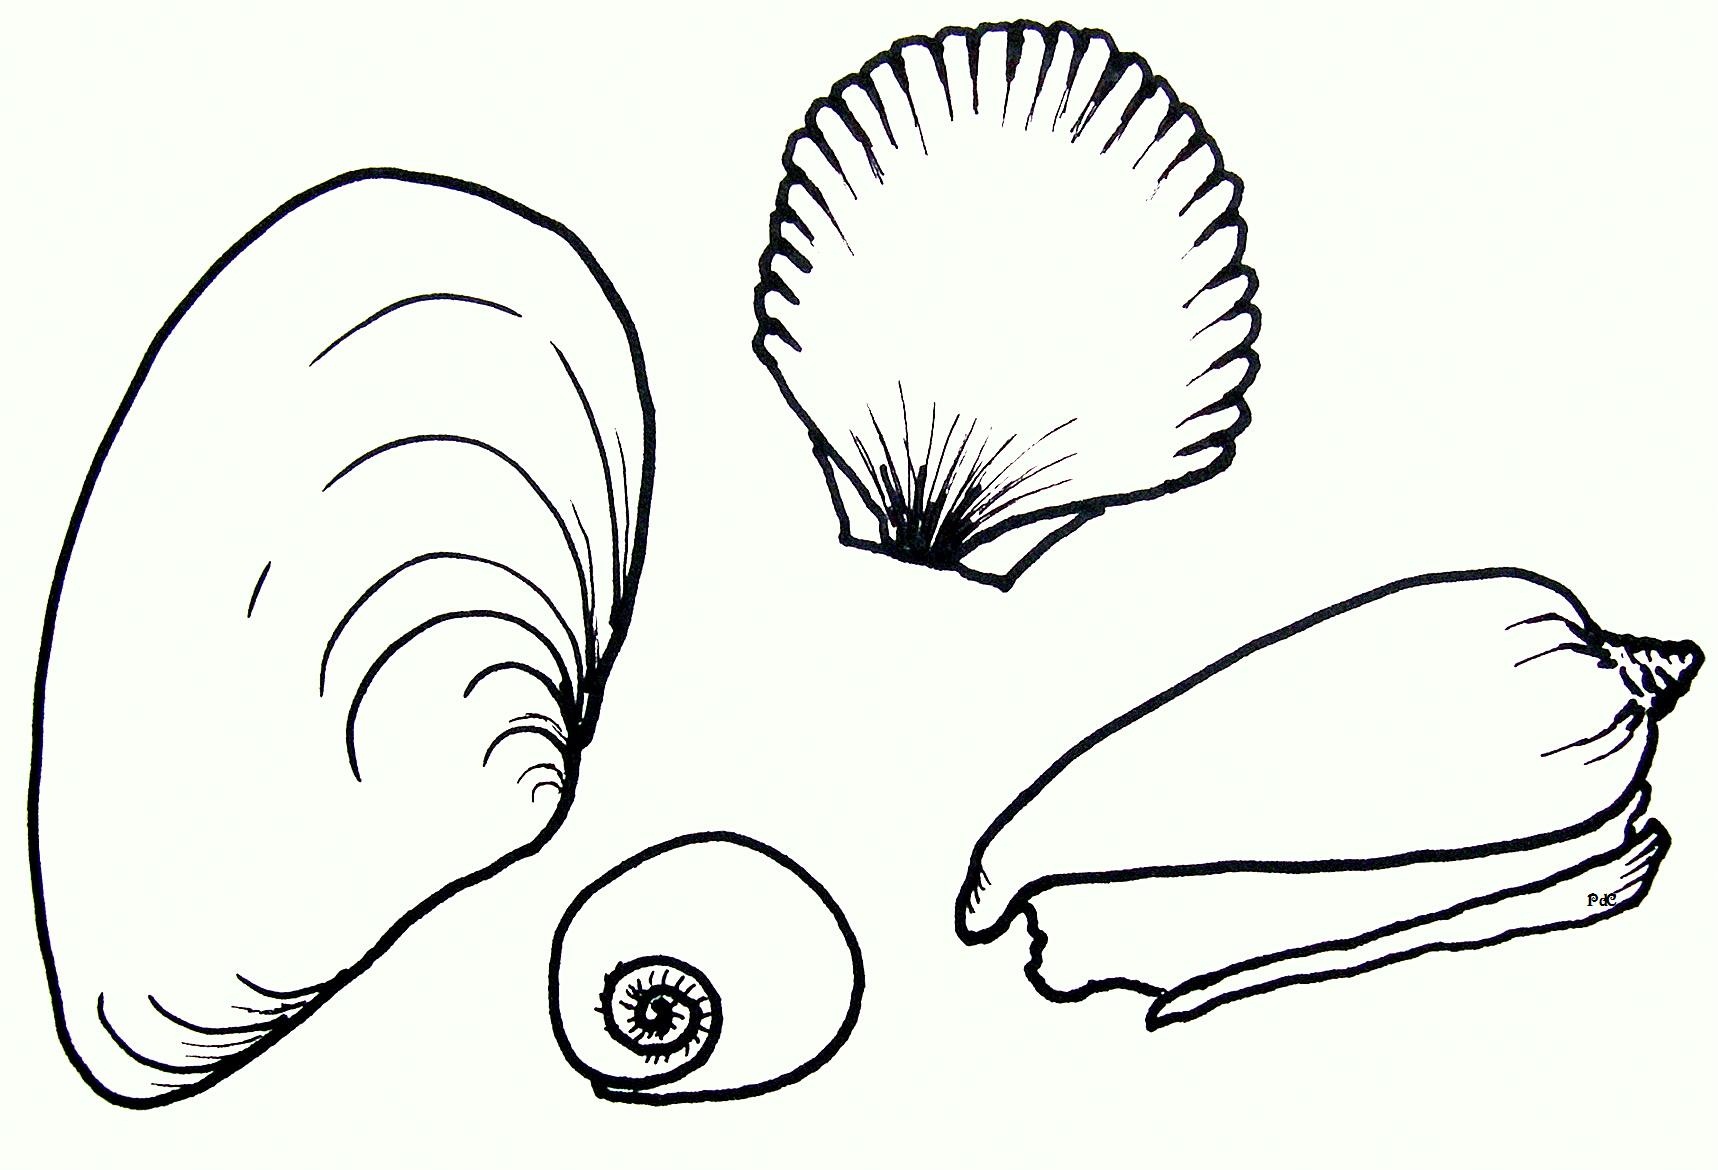 Scallop coloring #19, Download drawings